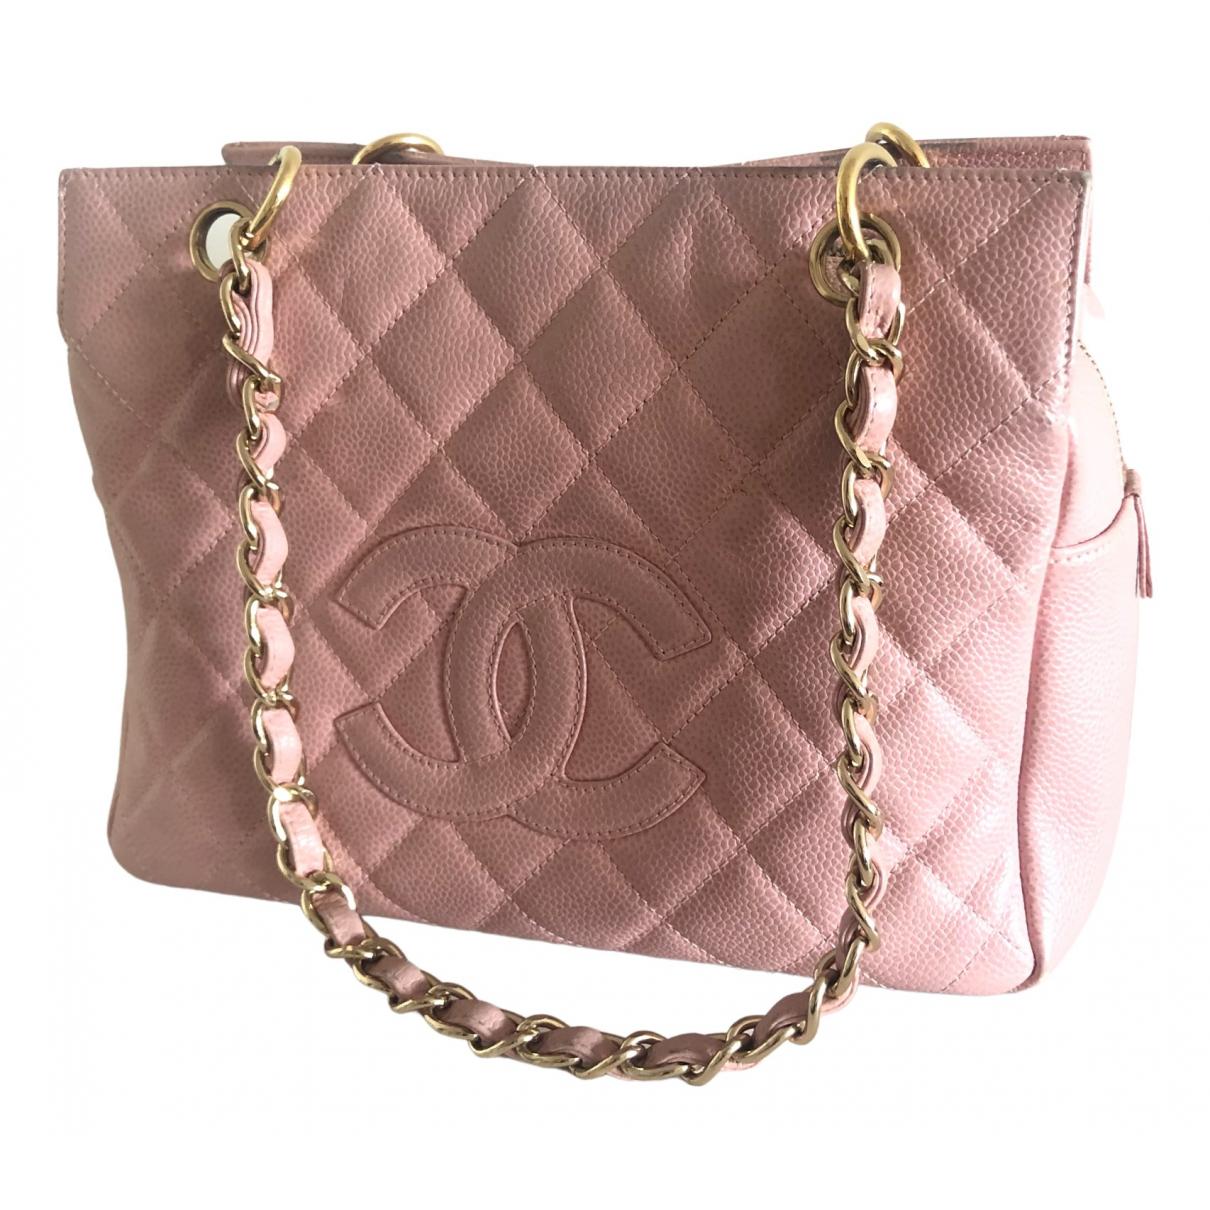 Petite shopping tote leather tote Chanel Pink in Leather - 17262326